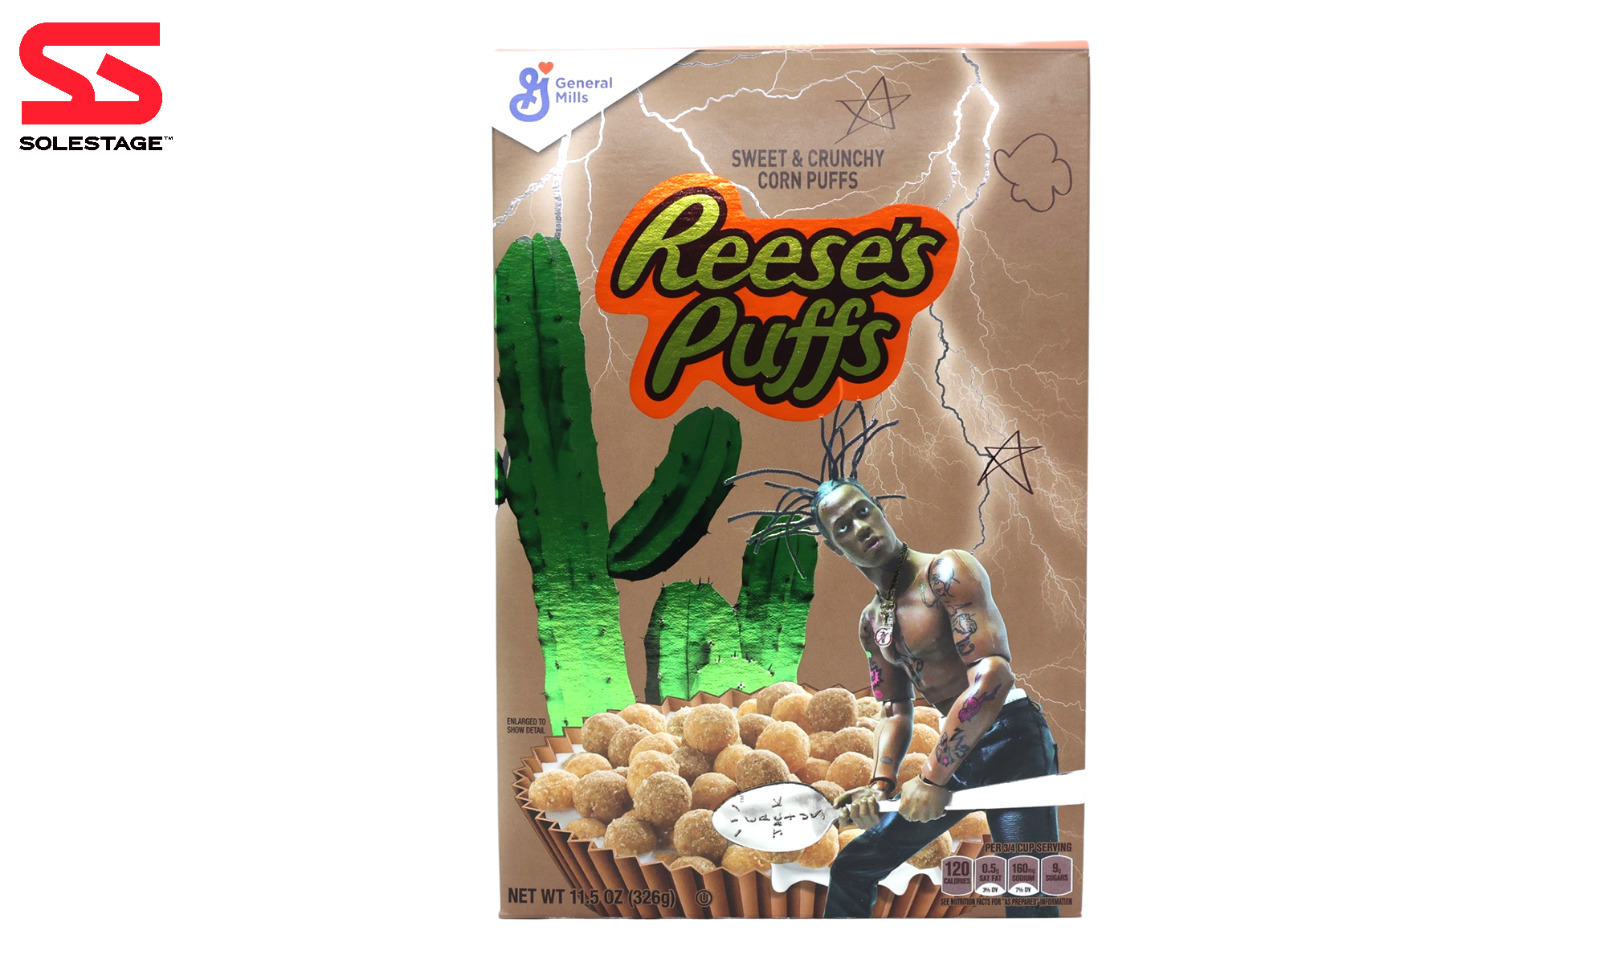 Travis Scott x Reese's Puffs Cereal Limited Edition Box w/ Acrylic Case